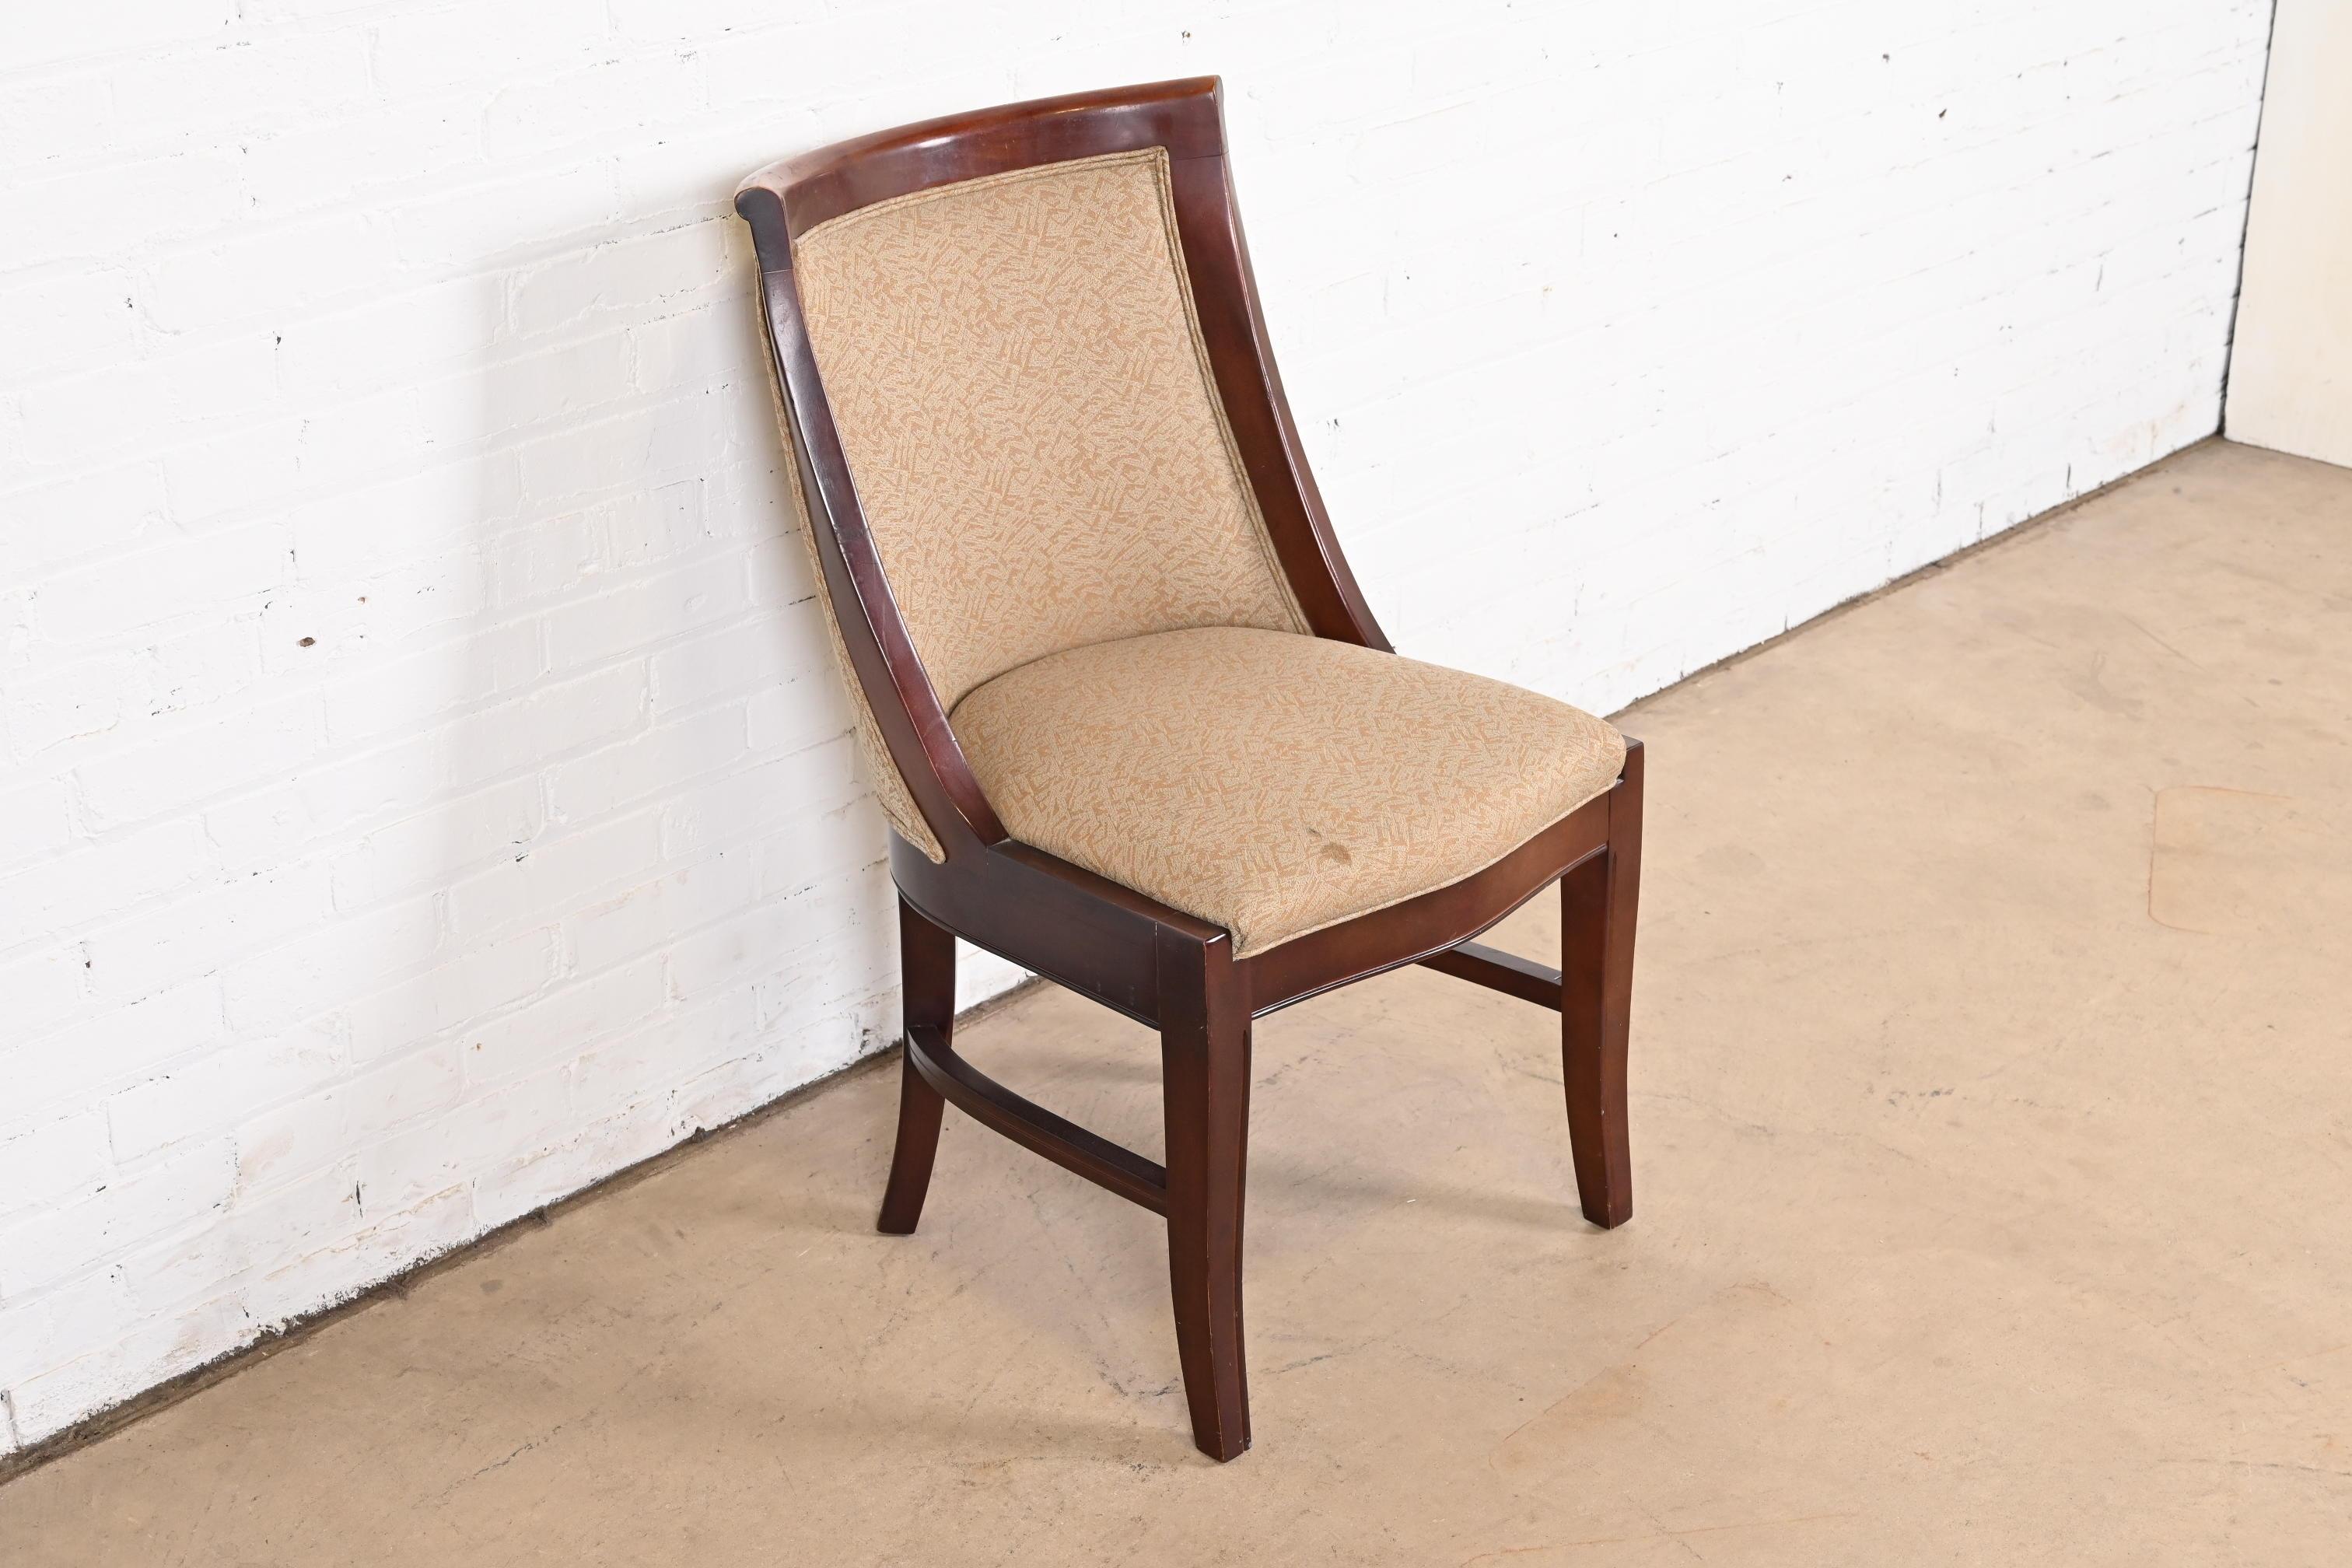 Upholstery Barbara Barry for Baker Furniture Attributed Modern Art Deco Mahogany Side Chair